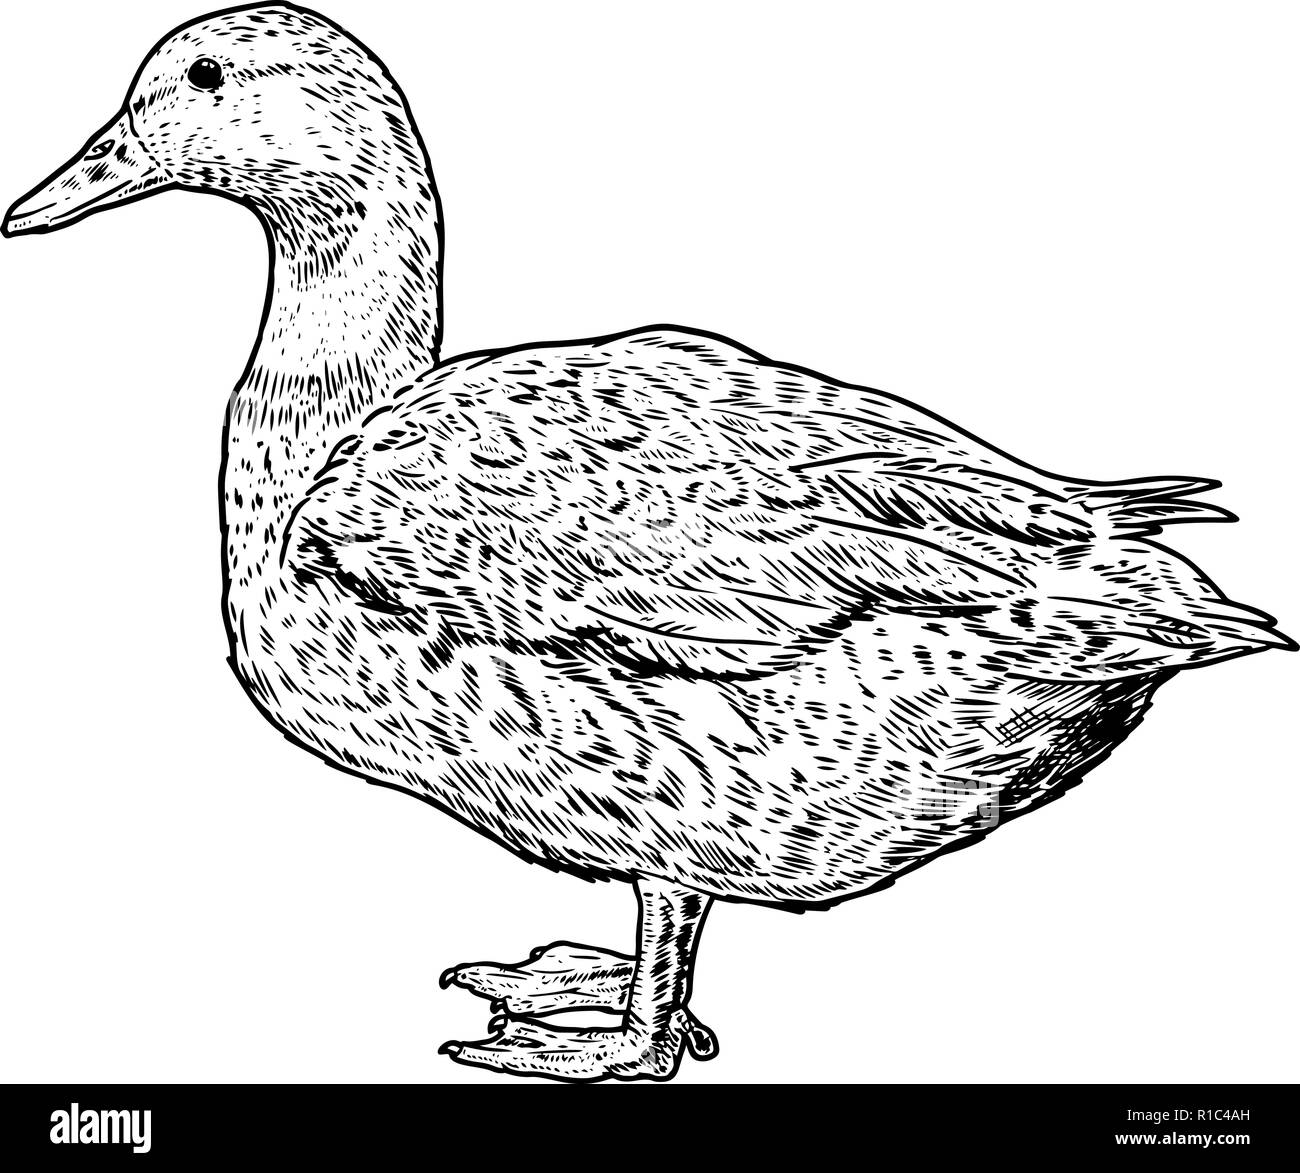 34021 White Duck Drawing Images Stock Photos  Vectors  Shutterstock